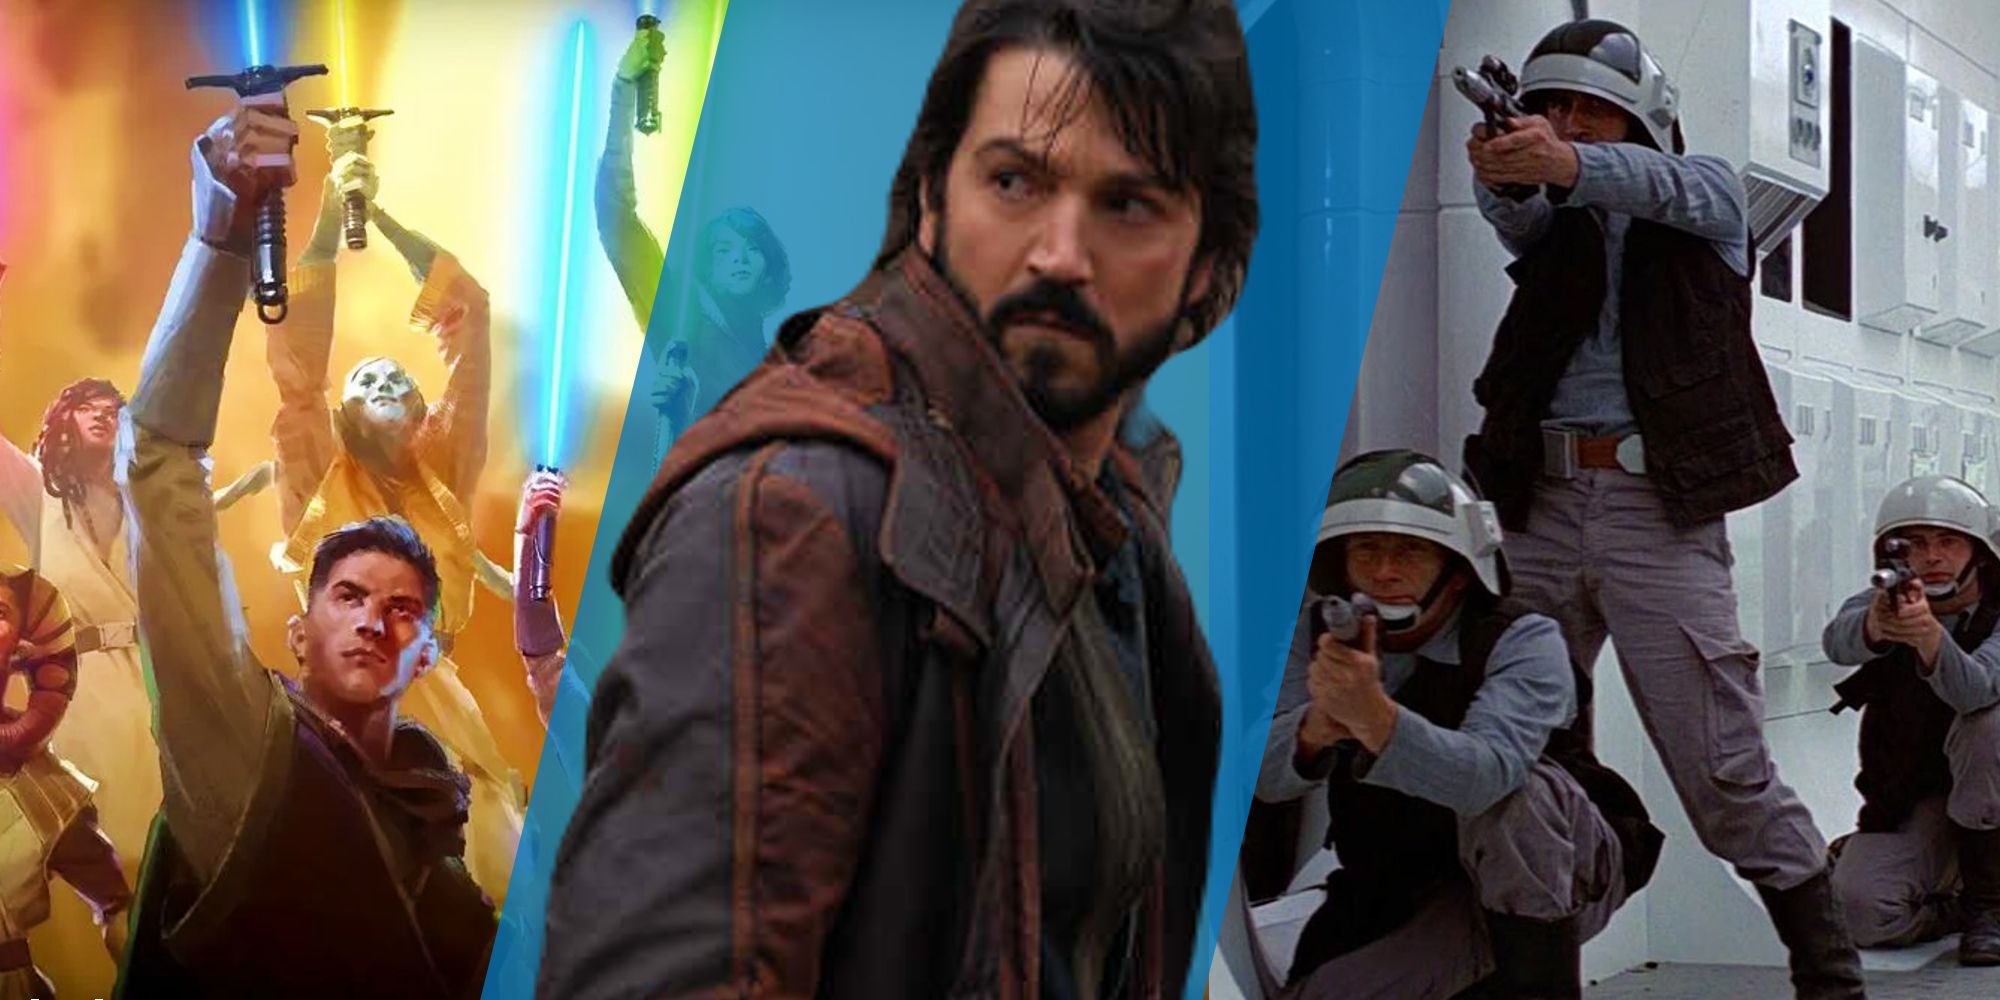 Cassian Andor separating images of the High Republic Jedi Order and the soldiers of the Rebel Alliance